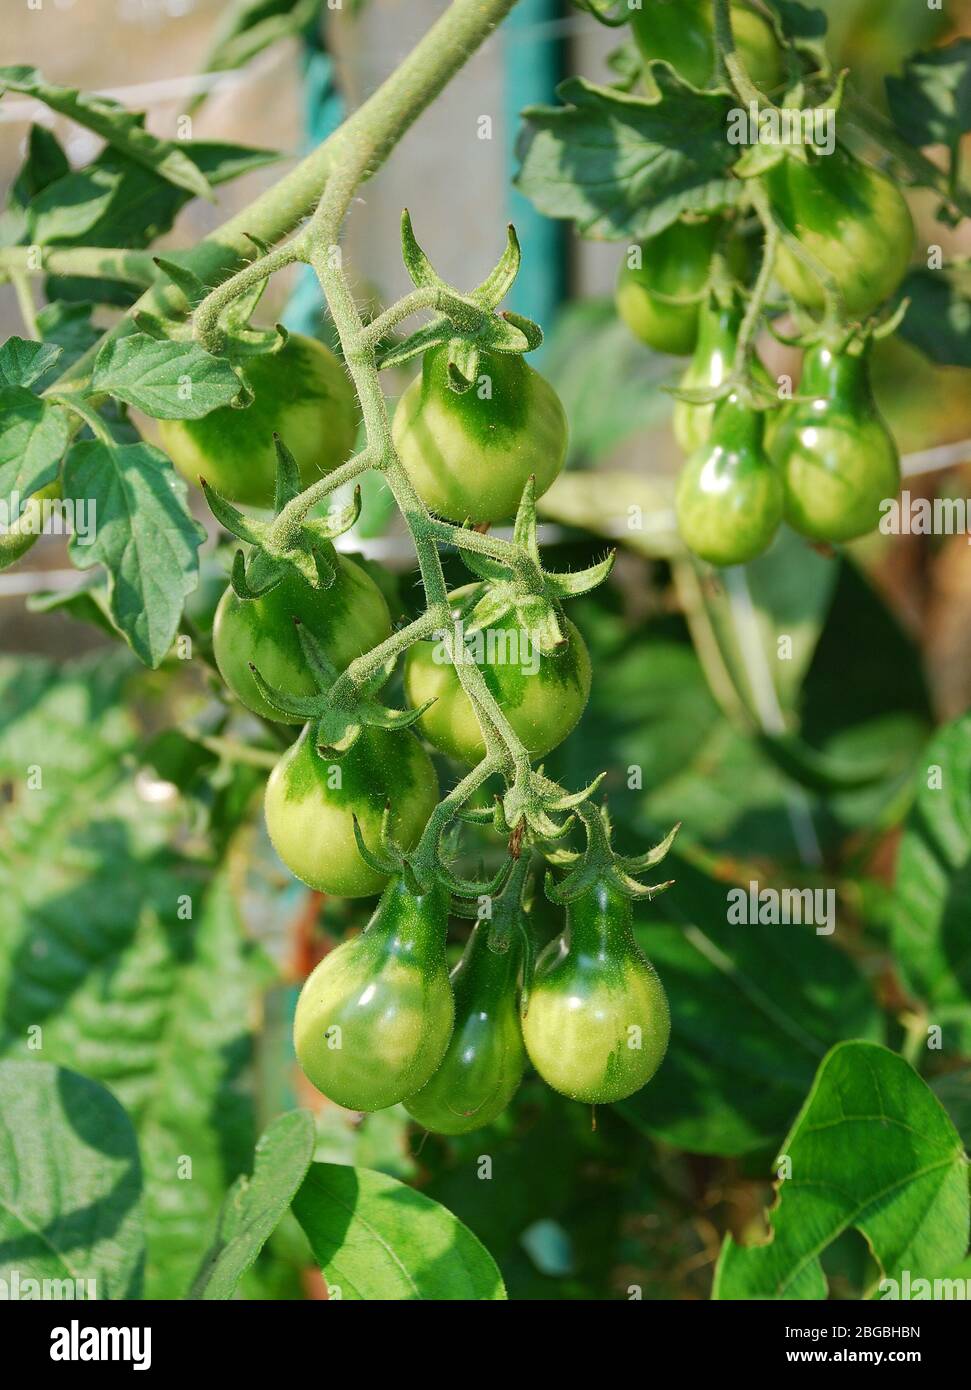 Unripe yellow pear tomatoes, sometimes known as Beam's Yellow Pear, growing on a vine in late summer Stock Photo